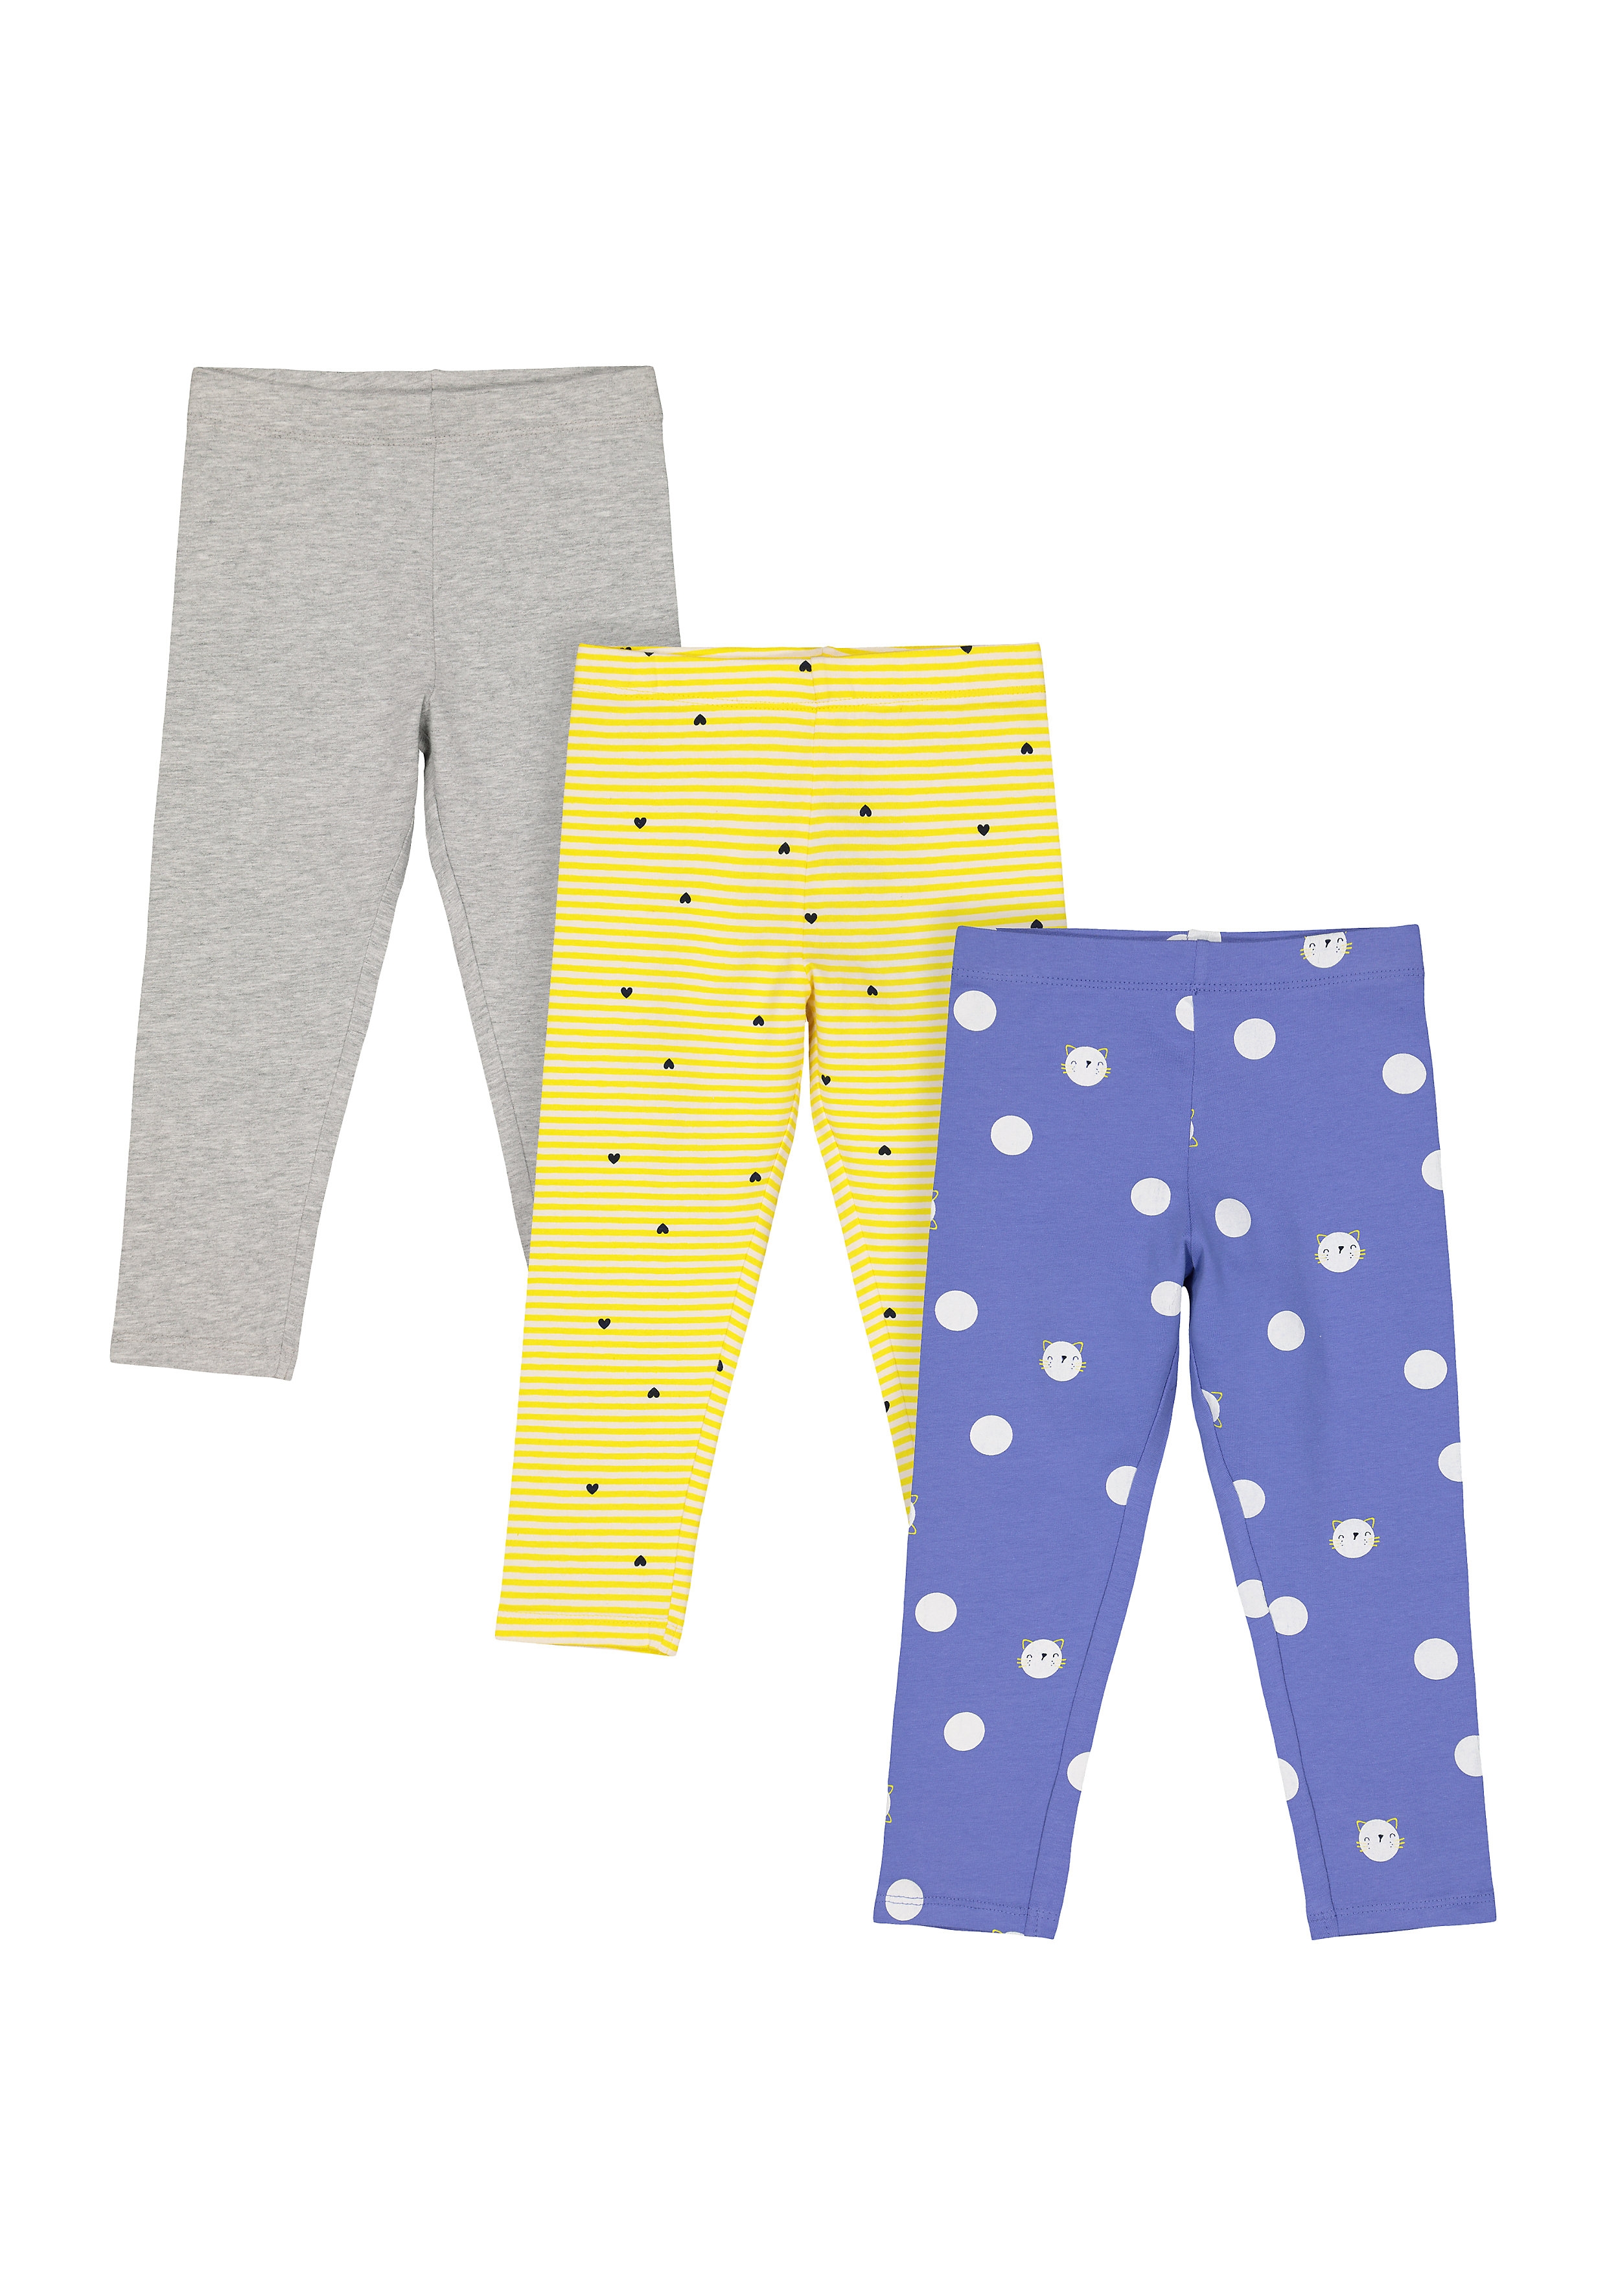 Mothercare | Girls Leggings Stripes And Polka Dot Print - Pack Of 3 - Yellow Blue Grey